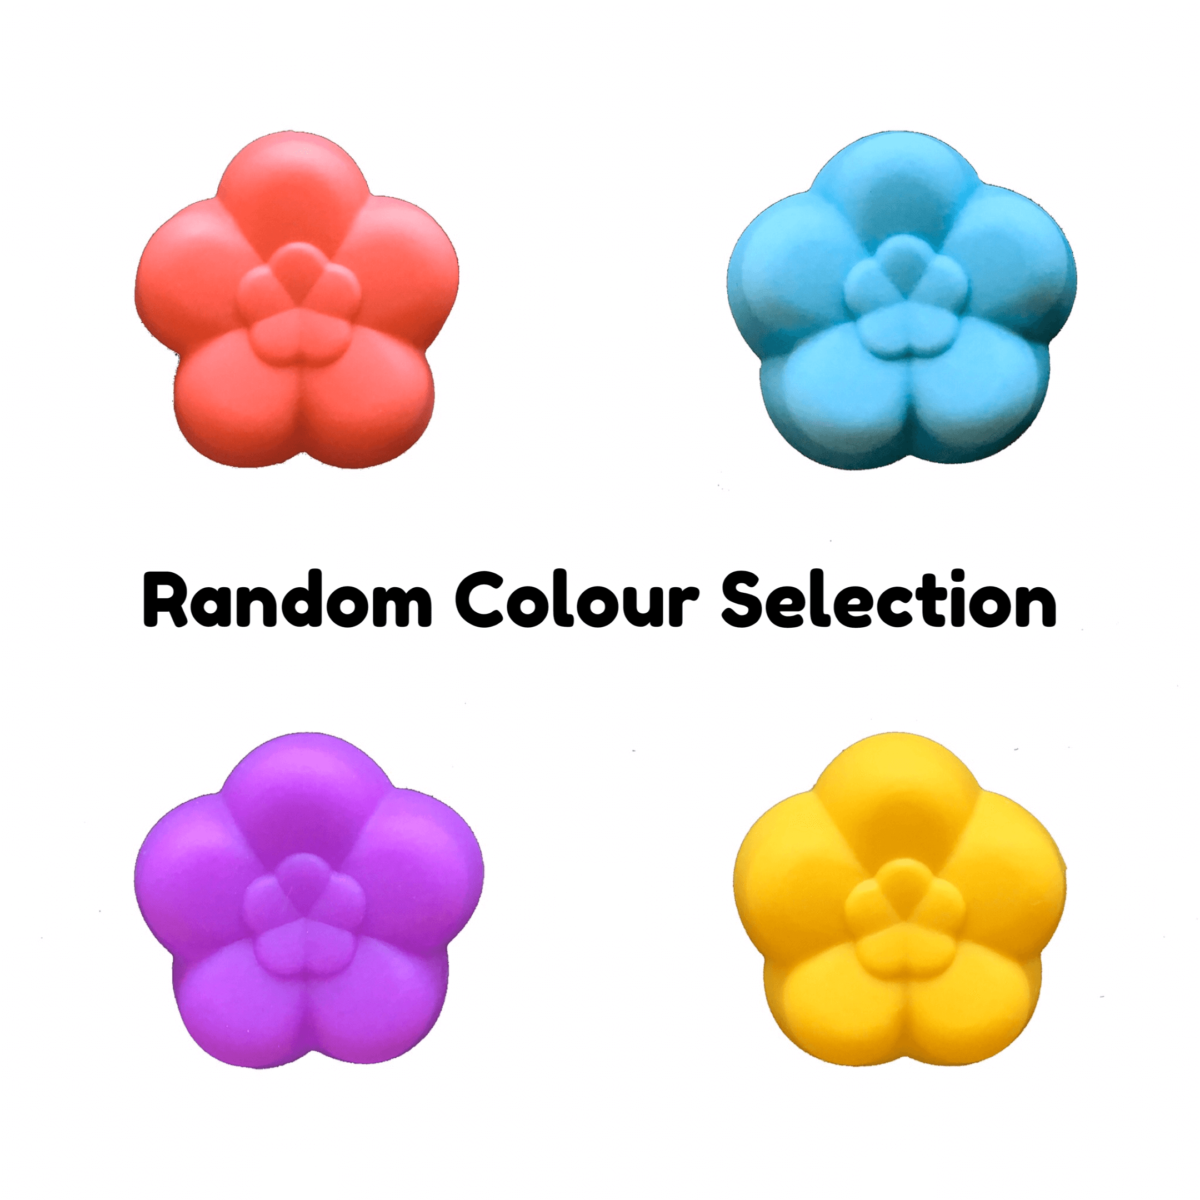 5cm plum blossom single cavity silicone mould displayed in red, blue, purple and yellow with the text 'random colour selection'